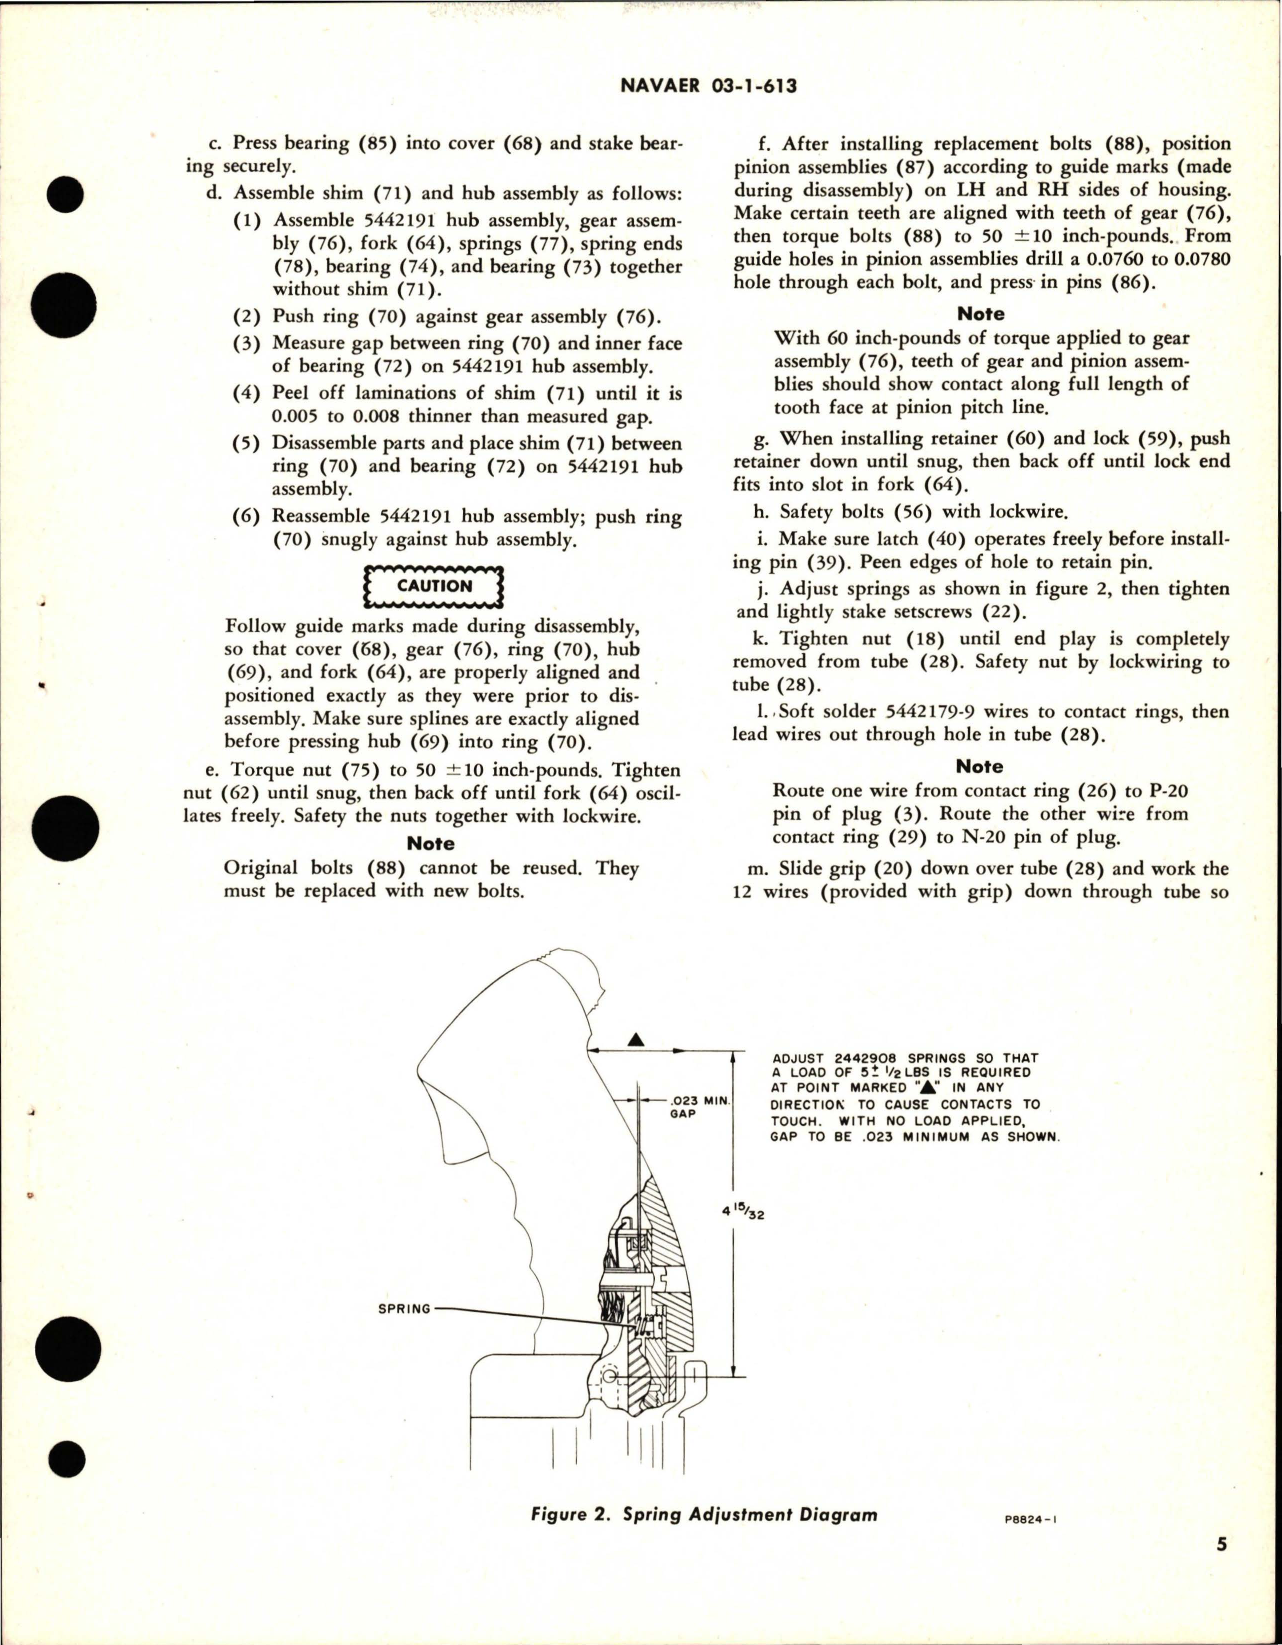 Sample page 5 from AirCorps Library document: Overhaul Instructions with Parts Breakdown for Pilot's Control Stick Assembly and Control Mixer Assembly